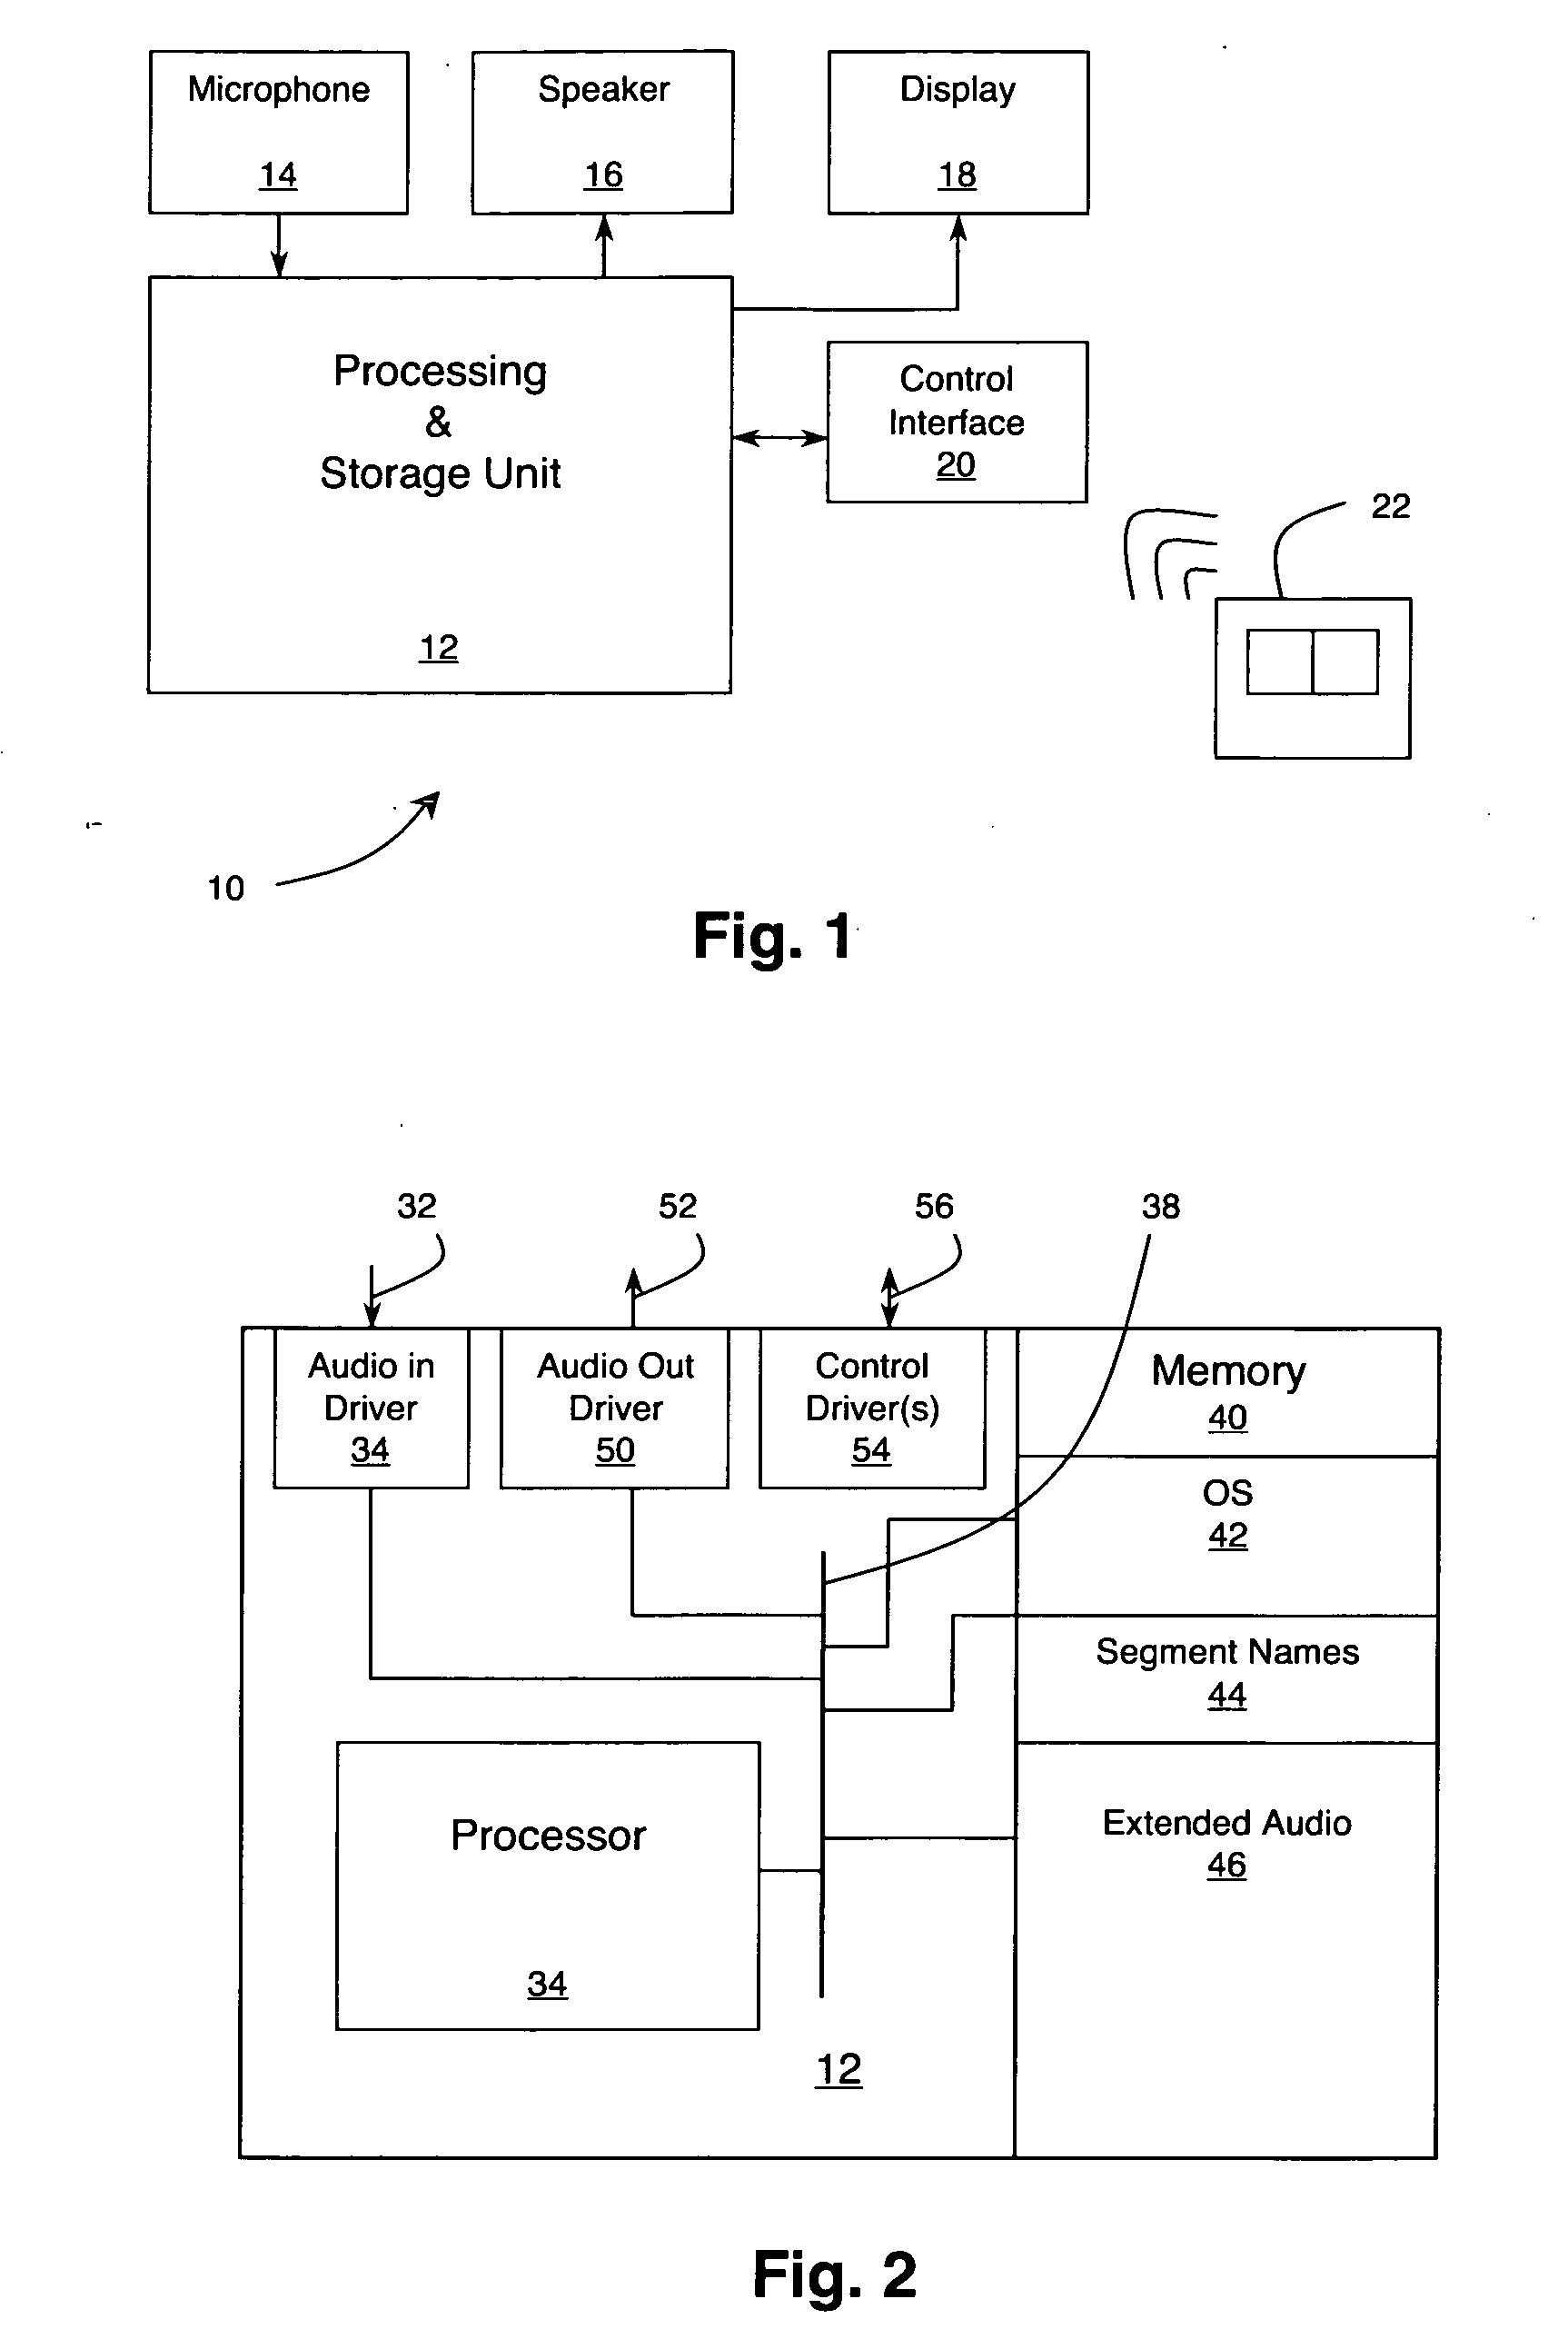 System and method for detecting and storing important information